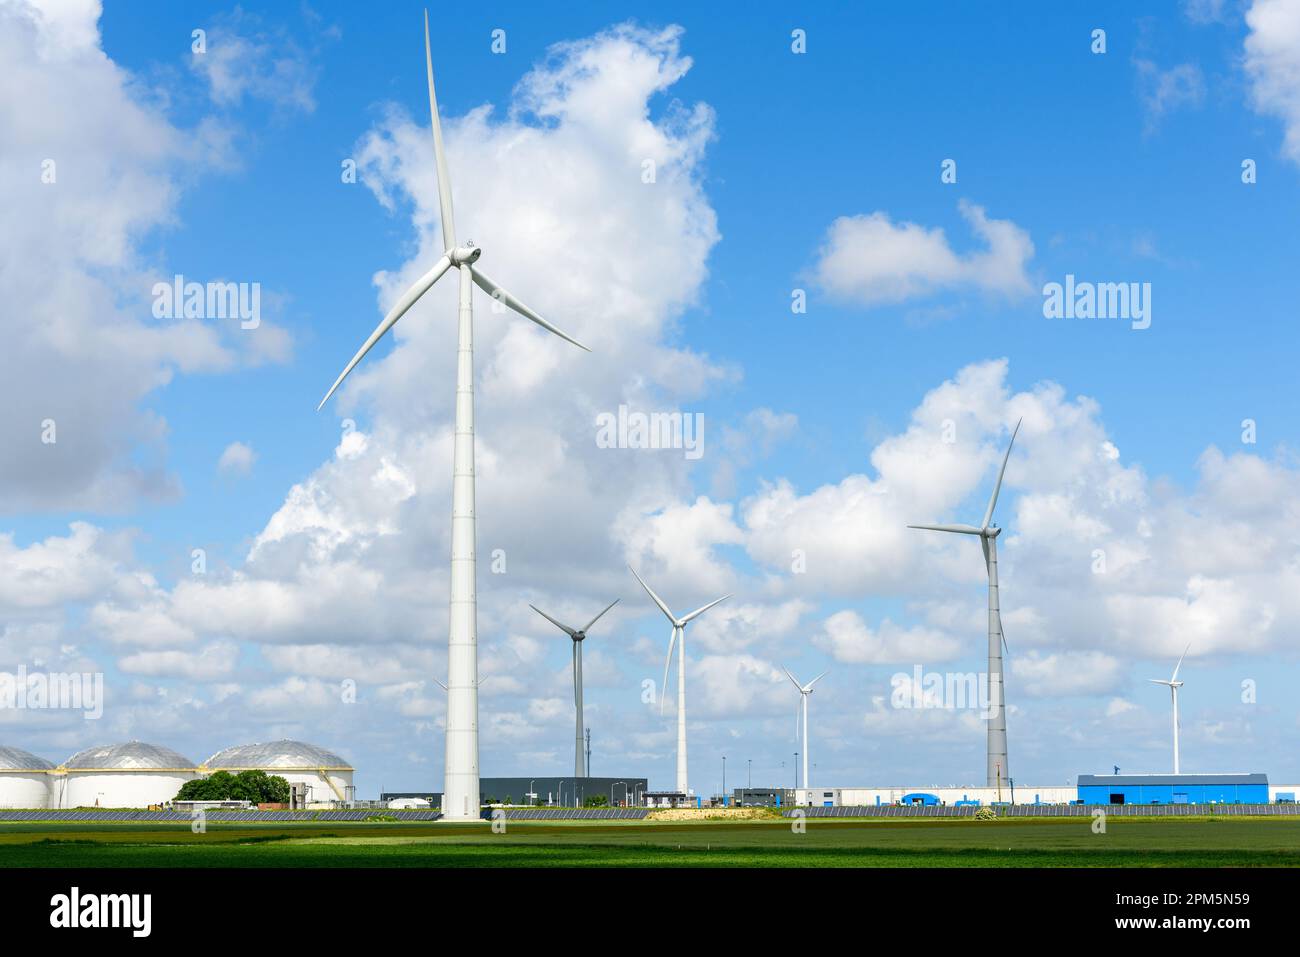 Tall wind turbines in a industrial park on a clear summer day Stock Photo